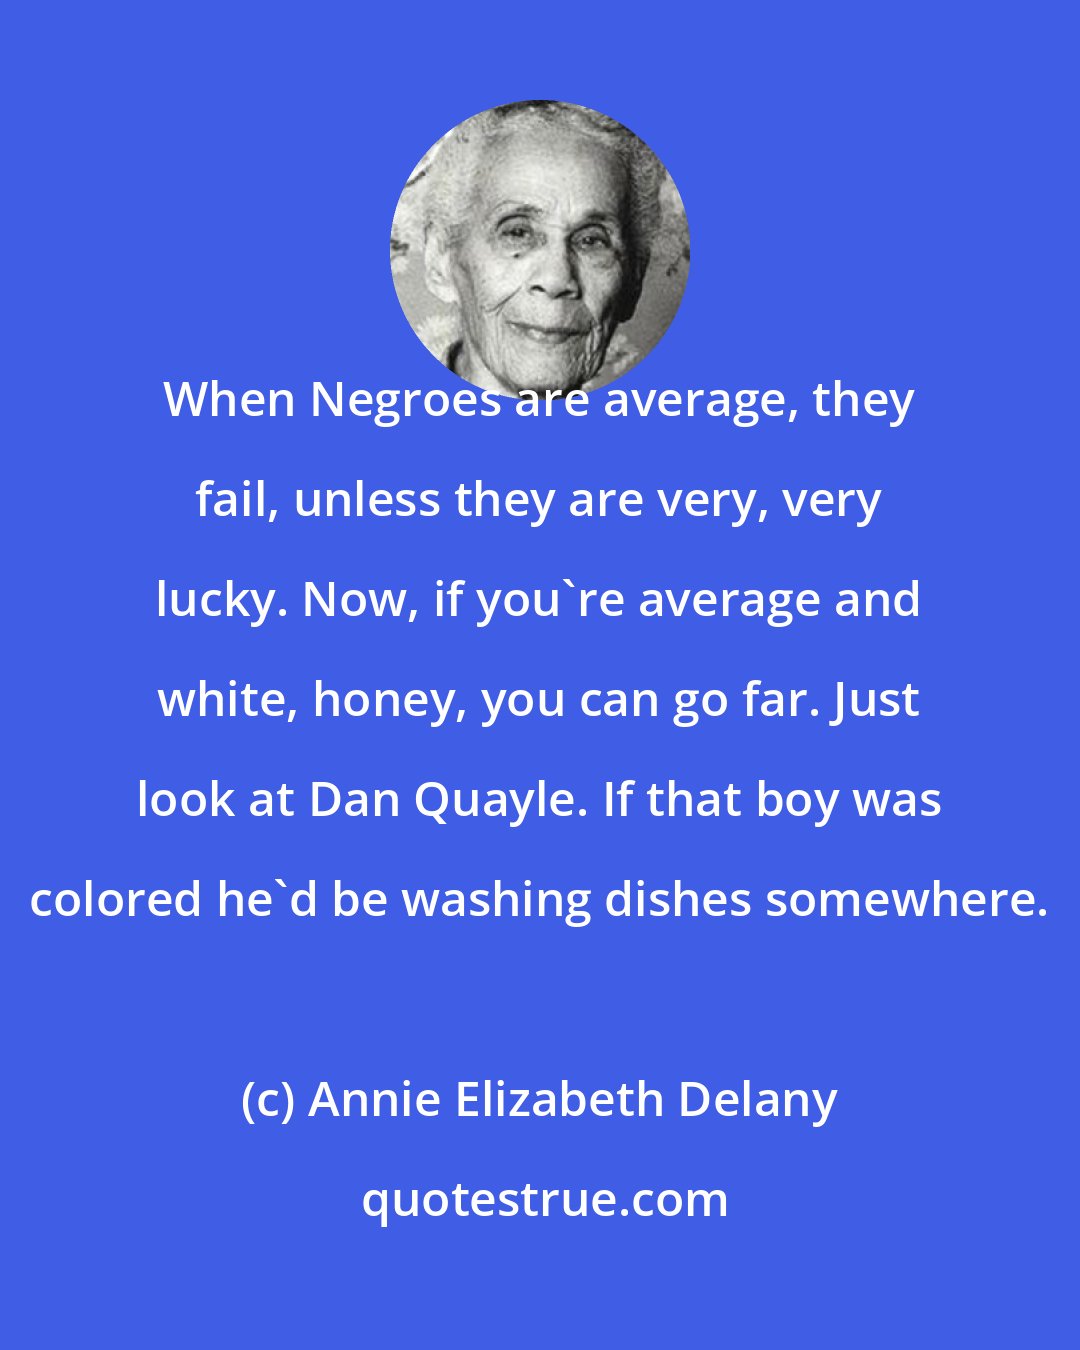 Annie Elizabeth Delany: When Negroes are average, they fail, unless they are very, very lucky. Now, if you're average and white, honey, you can go far. Just look at Dan Quayle. If that boy was colored he'd be washing dishes somewhere.